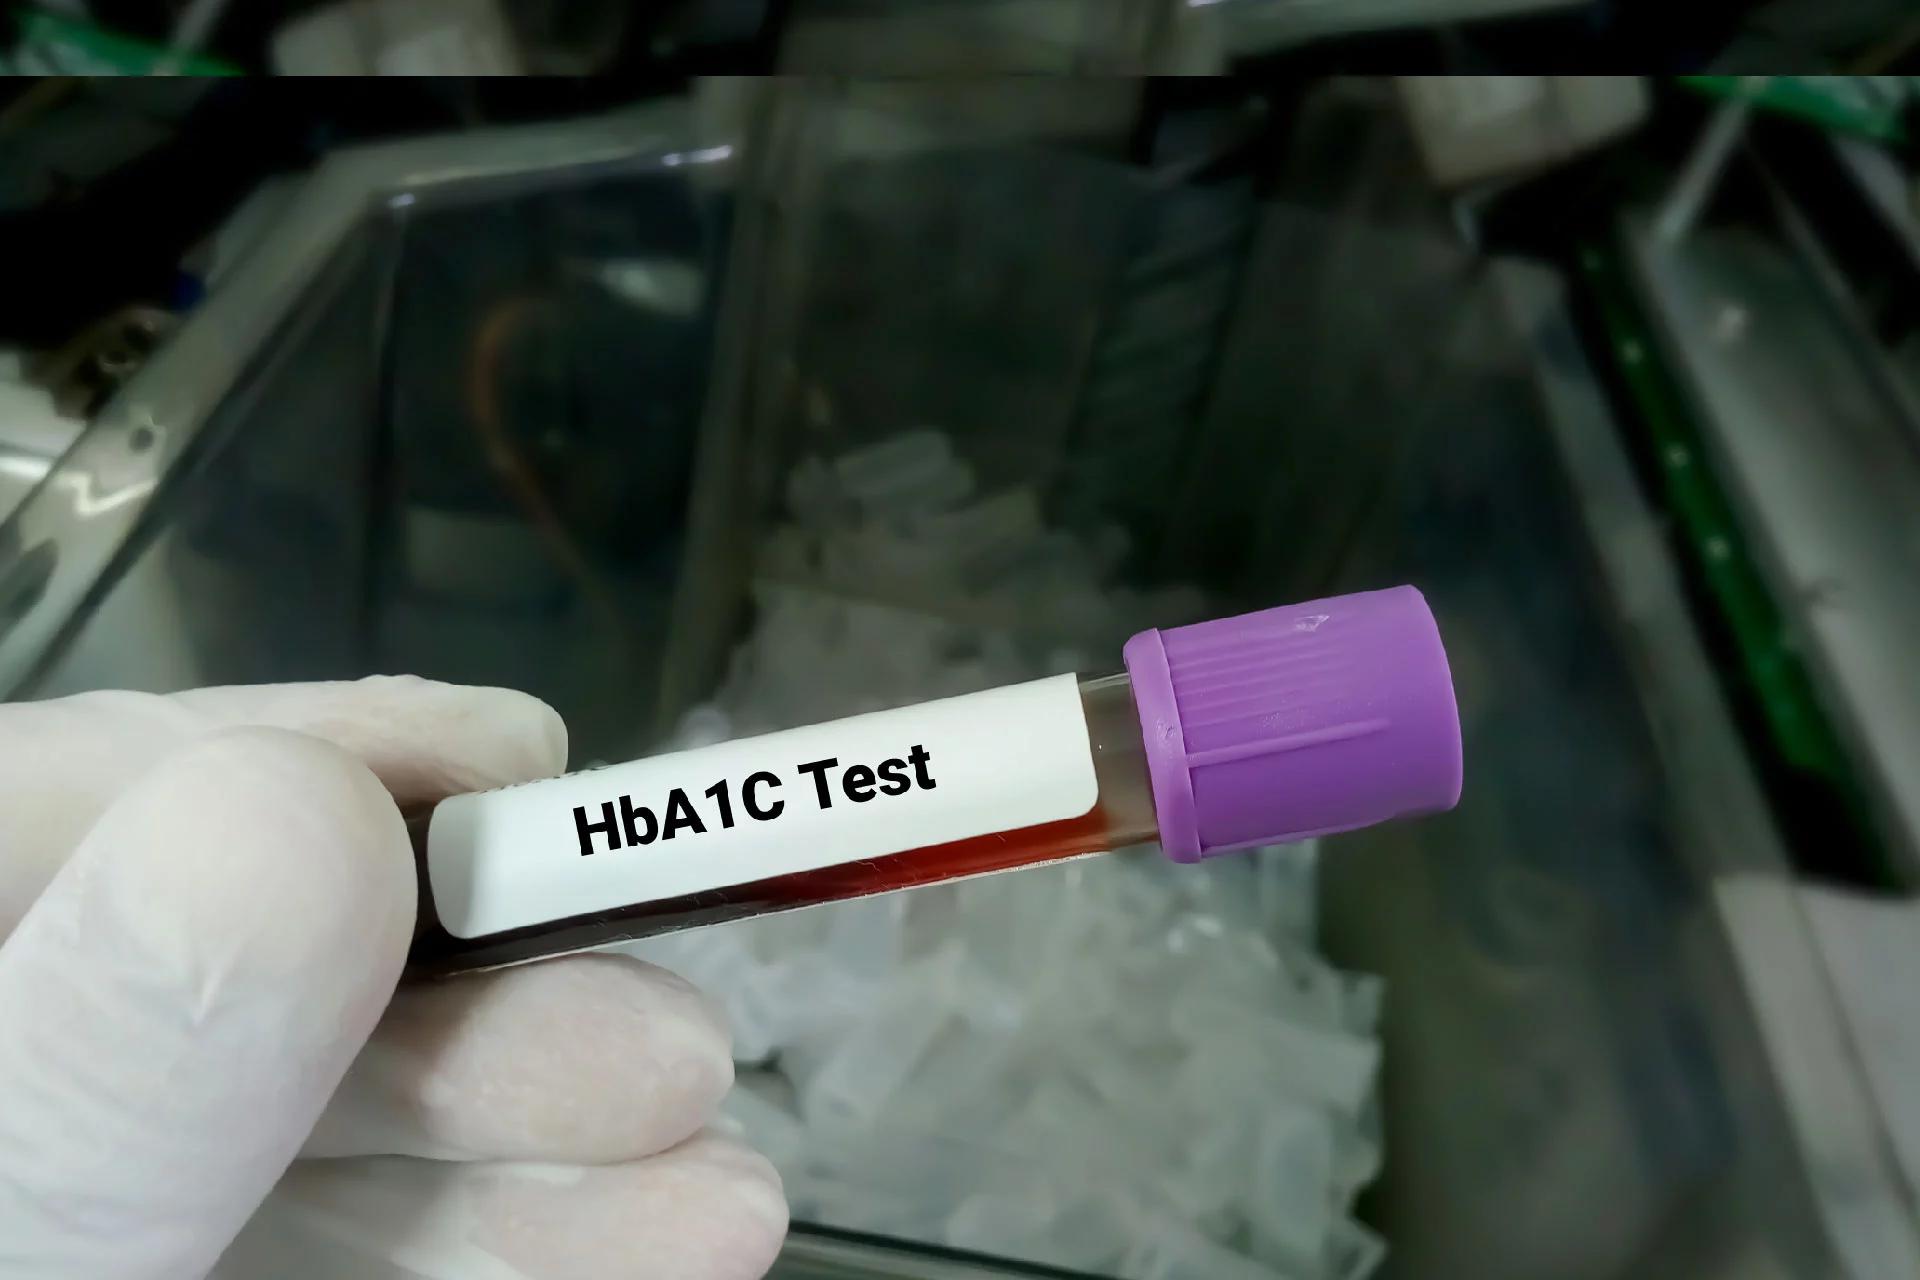 HbA1c Normal Range: How to Scan for Diabetes with HbA1c Test